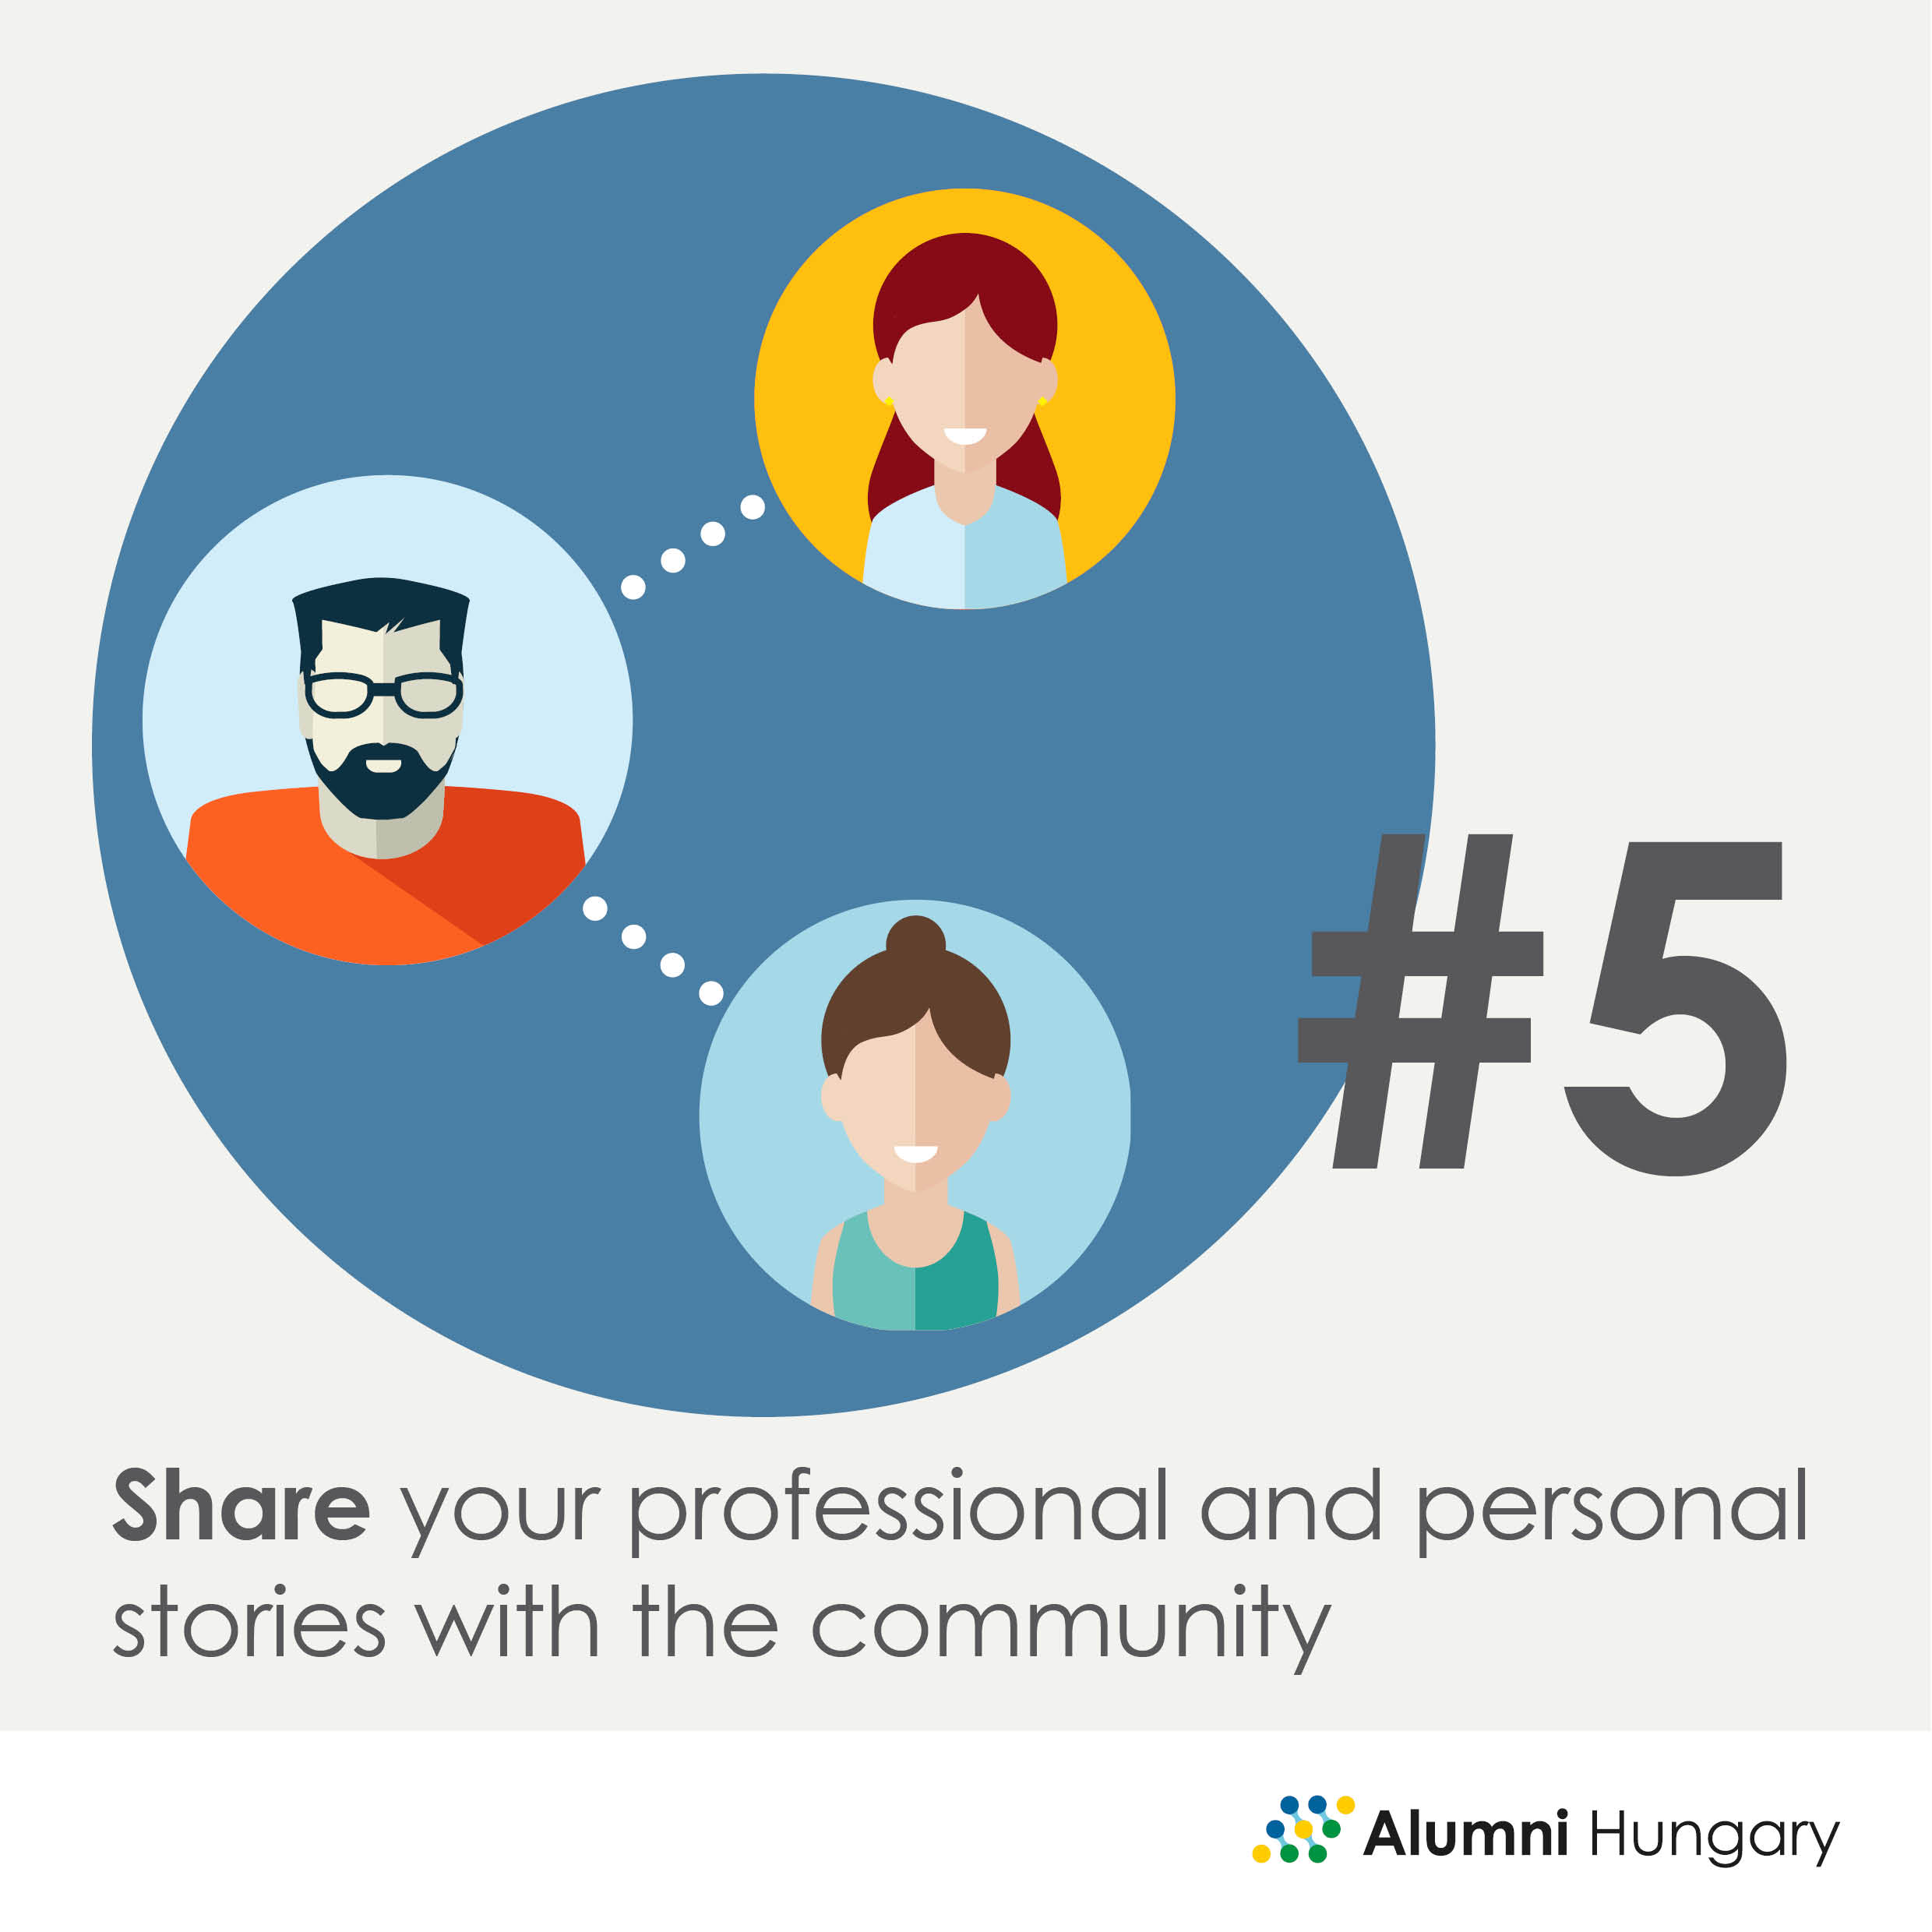 Share your professional and personal stories